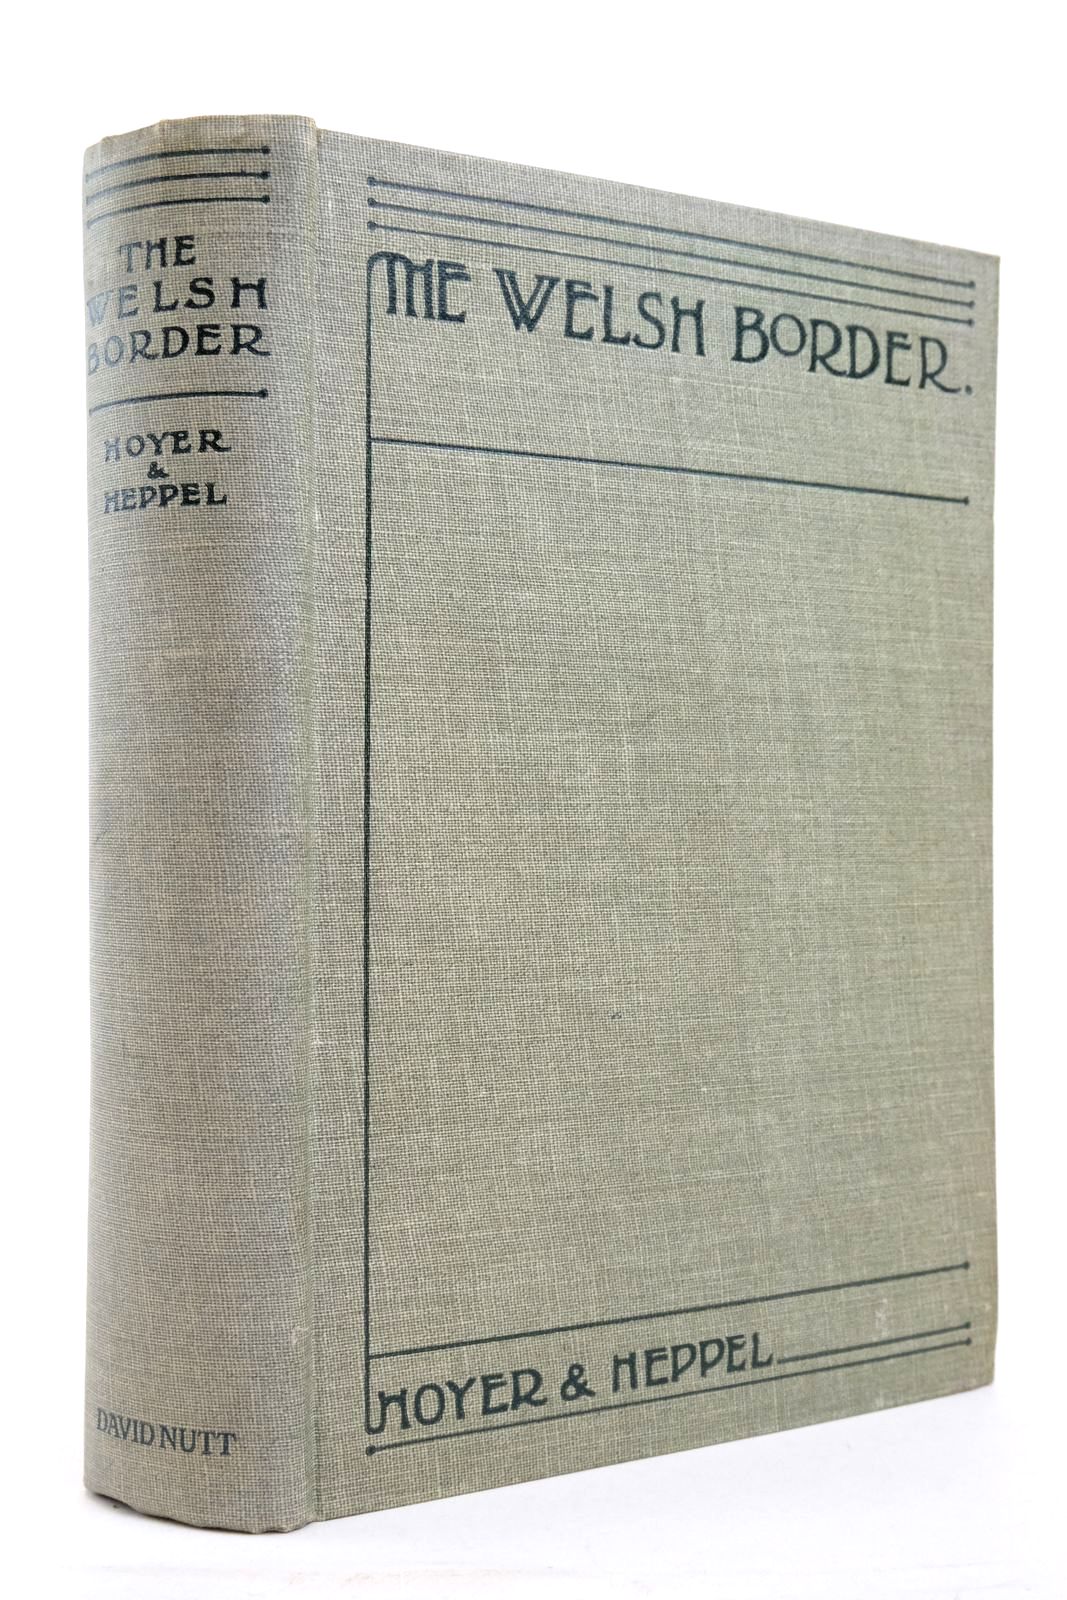 Photo of THE WELSH BORDER written by Hoyer, M.A. Heppel, M.L. illustrated by Hoyer, M.A. published by David Nutt (STOCK CODE: 2136766)  for sale by Stella & Rose's Books